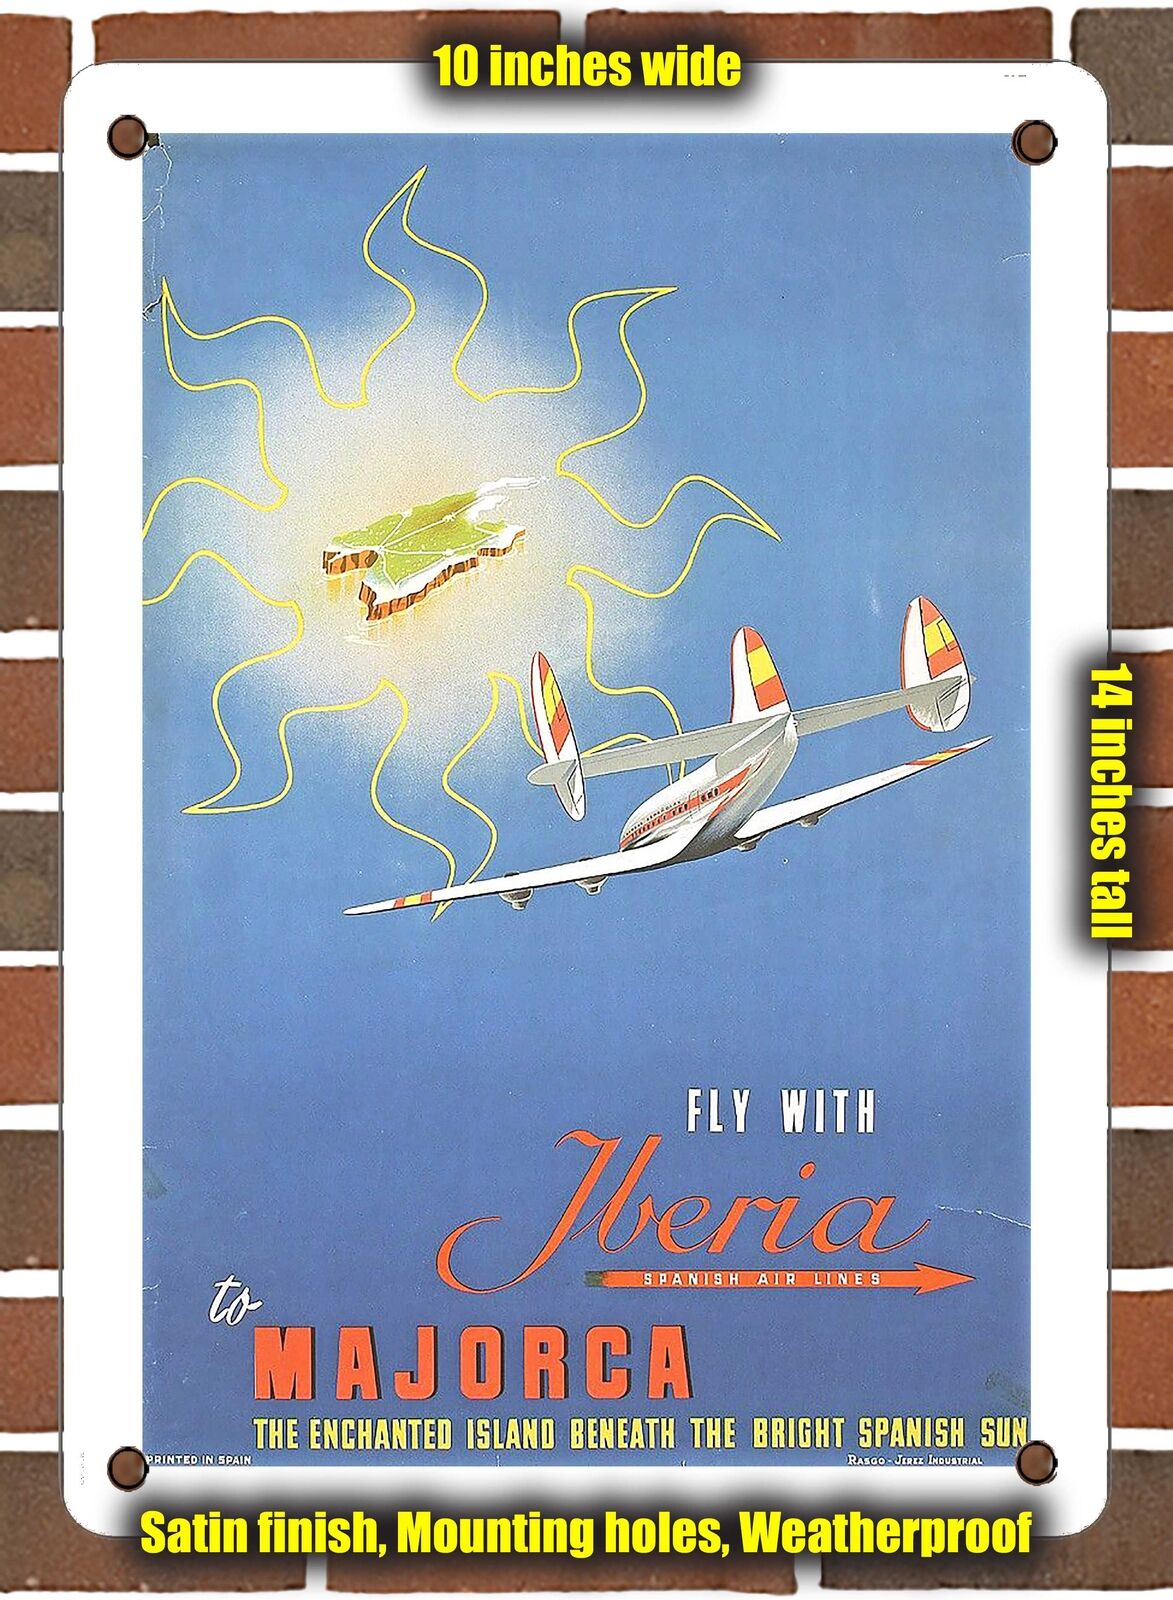 METAL SIGN - 1955 Fly with Iberia to Majorca - 10x14 Inches